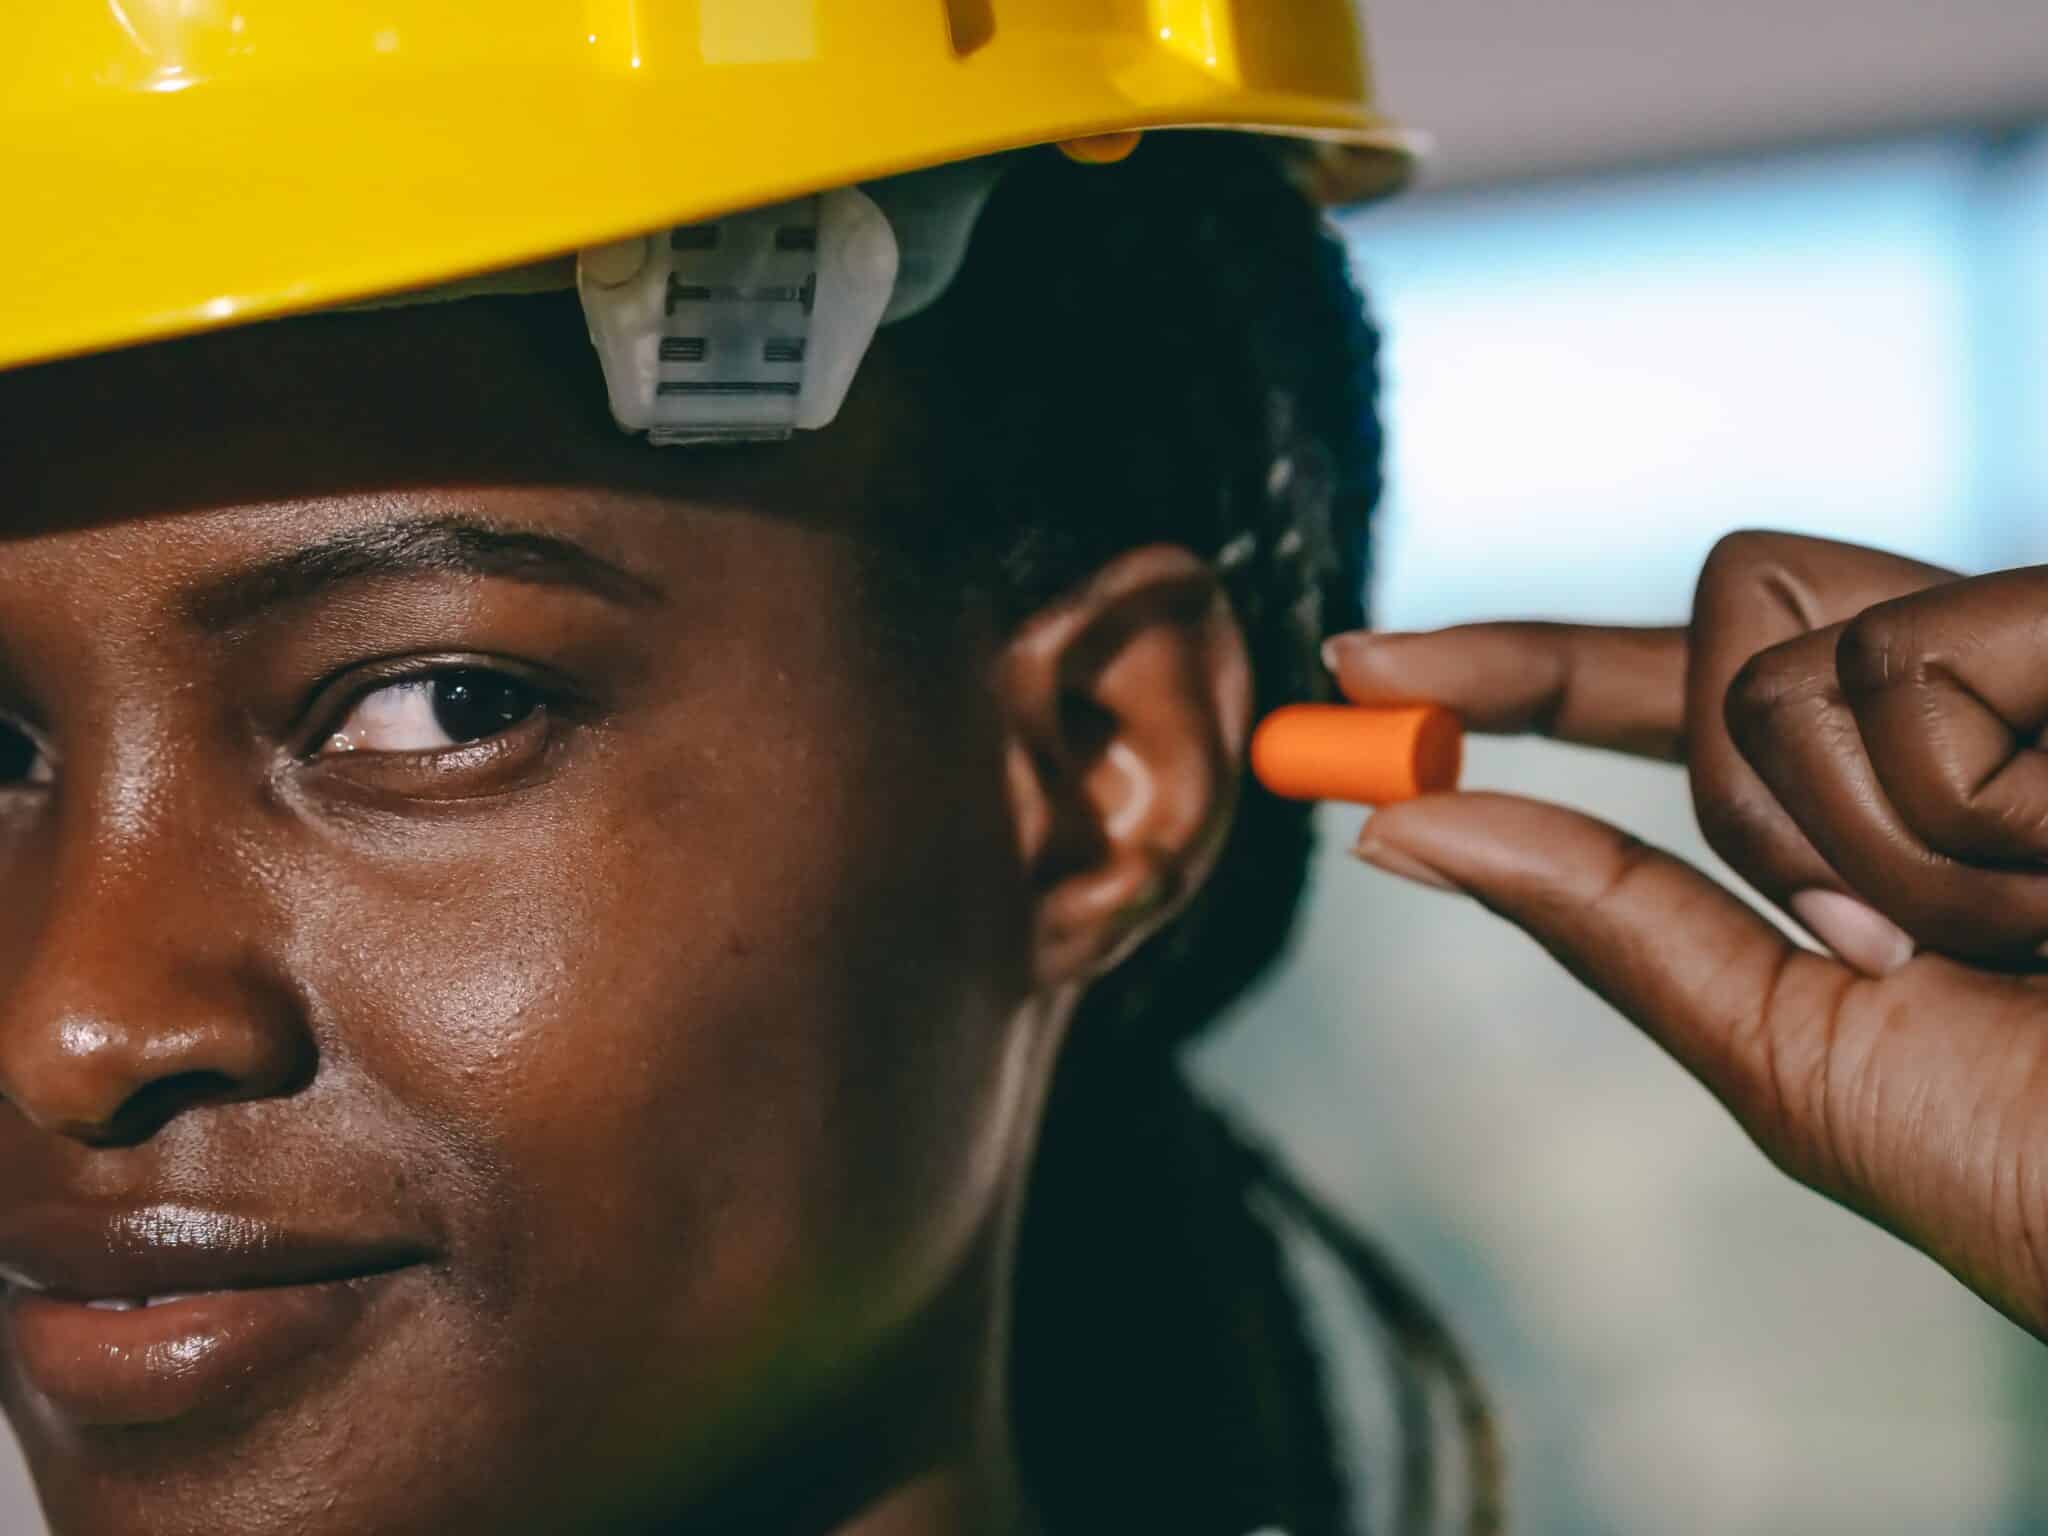 Female construction worker putting an earplug into her ear.